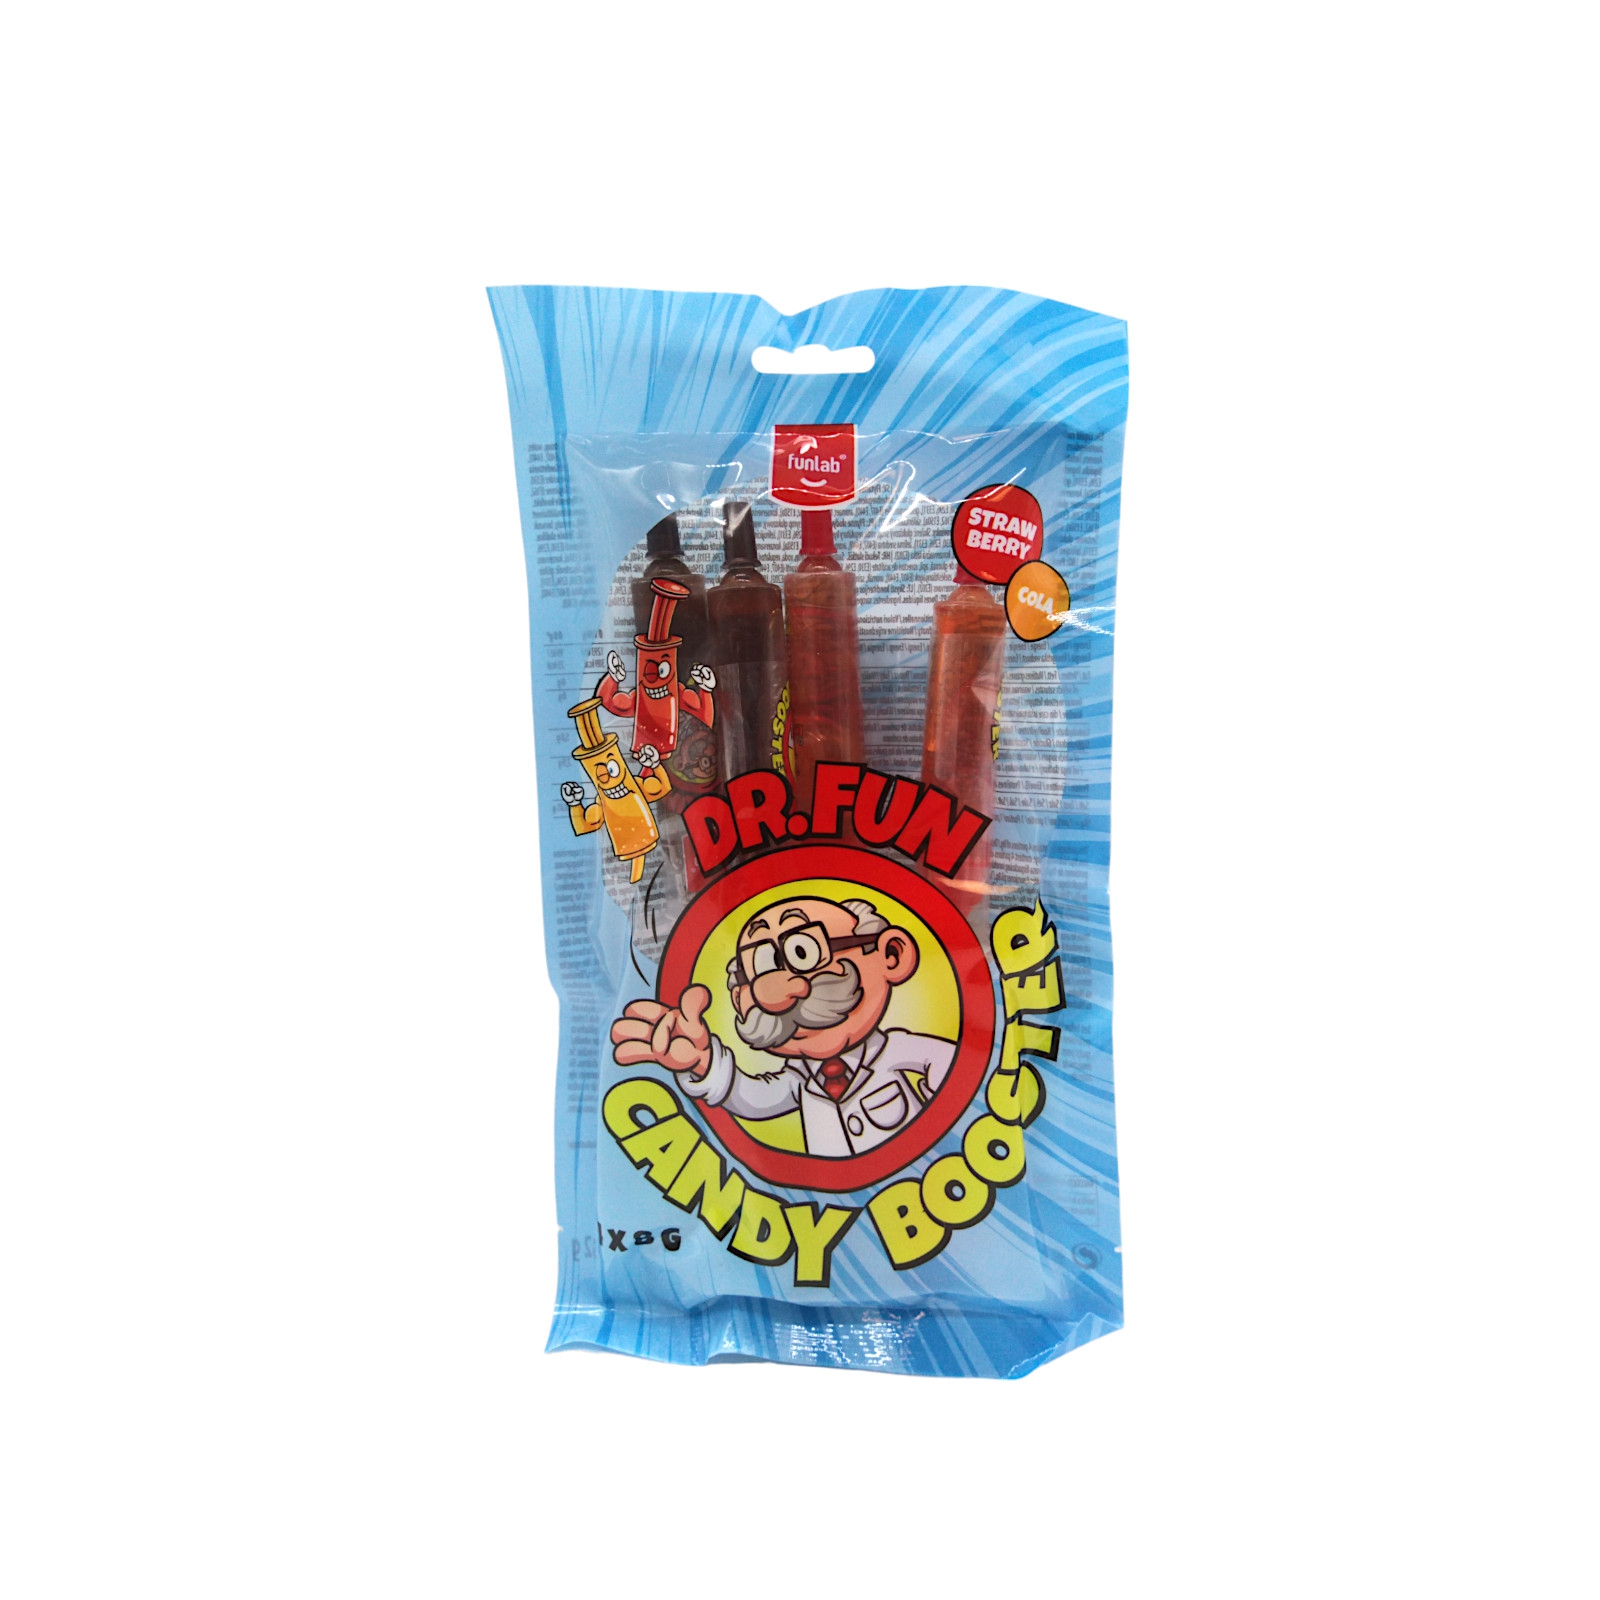 Dr. Fun Candy Booster 32g